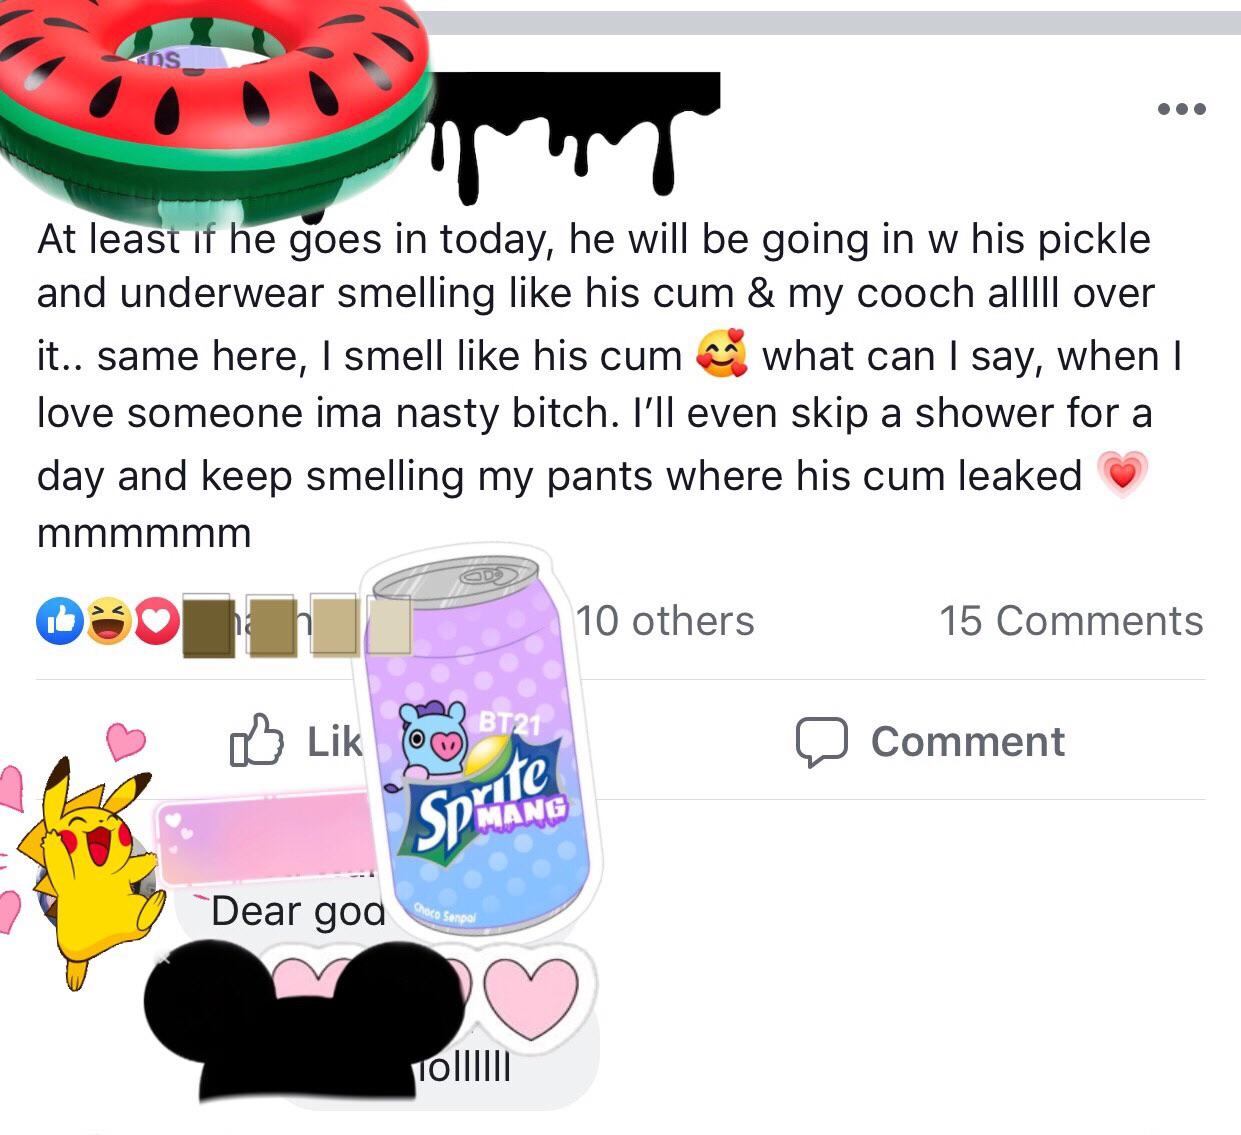 sprite - At least if he goes in today, he will be going in w his pickle and underwear smelling his cum & my cooch alllll over it.. same here, I smell his cum what can I say, when I love someone ima nasty bitch. I'll even skip a shower for a day and keep s